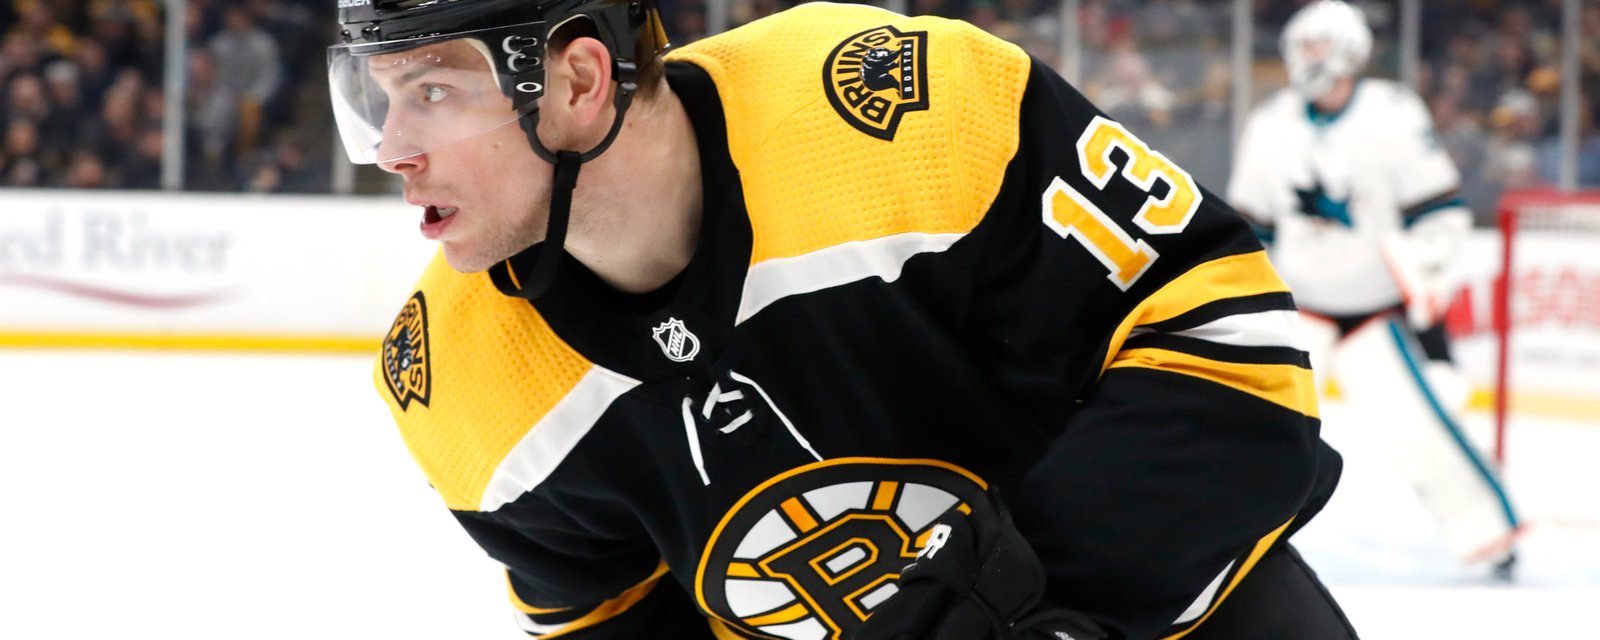 TSN analyst predicts Bruins’ Coyle “will get eaten alive” tonight vs. Leafs 